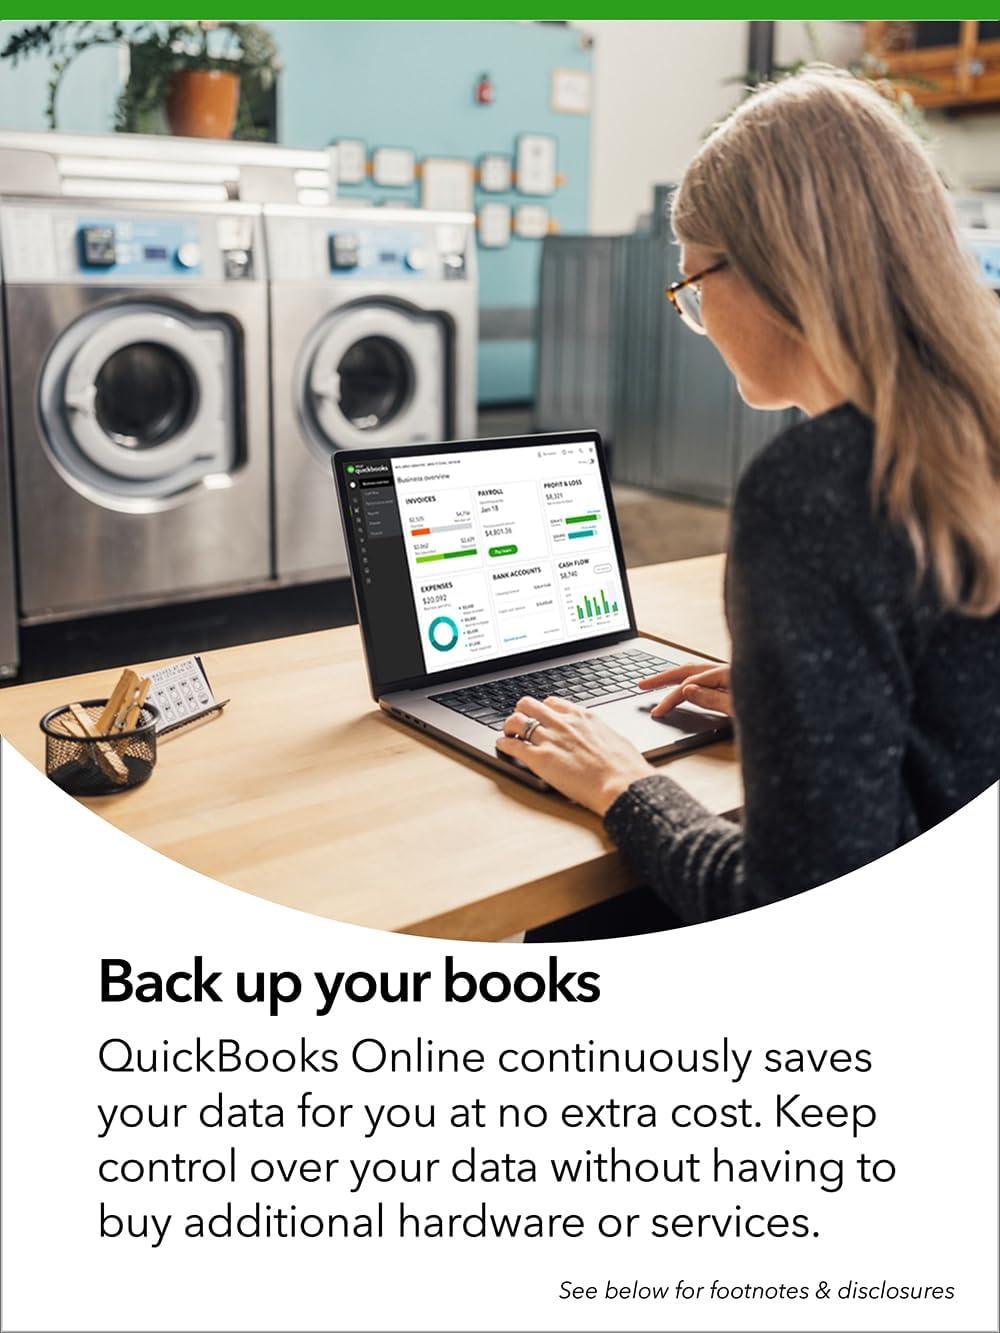 Quickbooks Online Essentials - Instant Download for Windows and Mac (3 Users) - SoftwareCW - Authorized Reseller